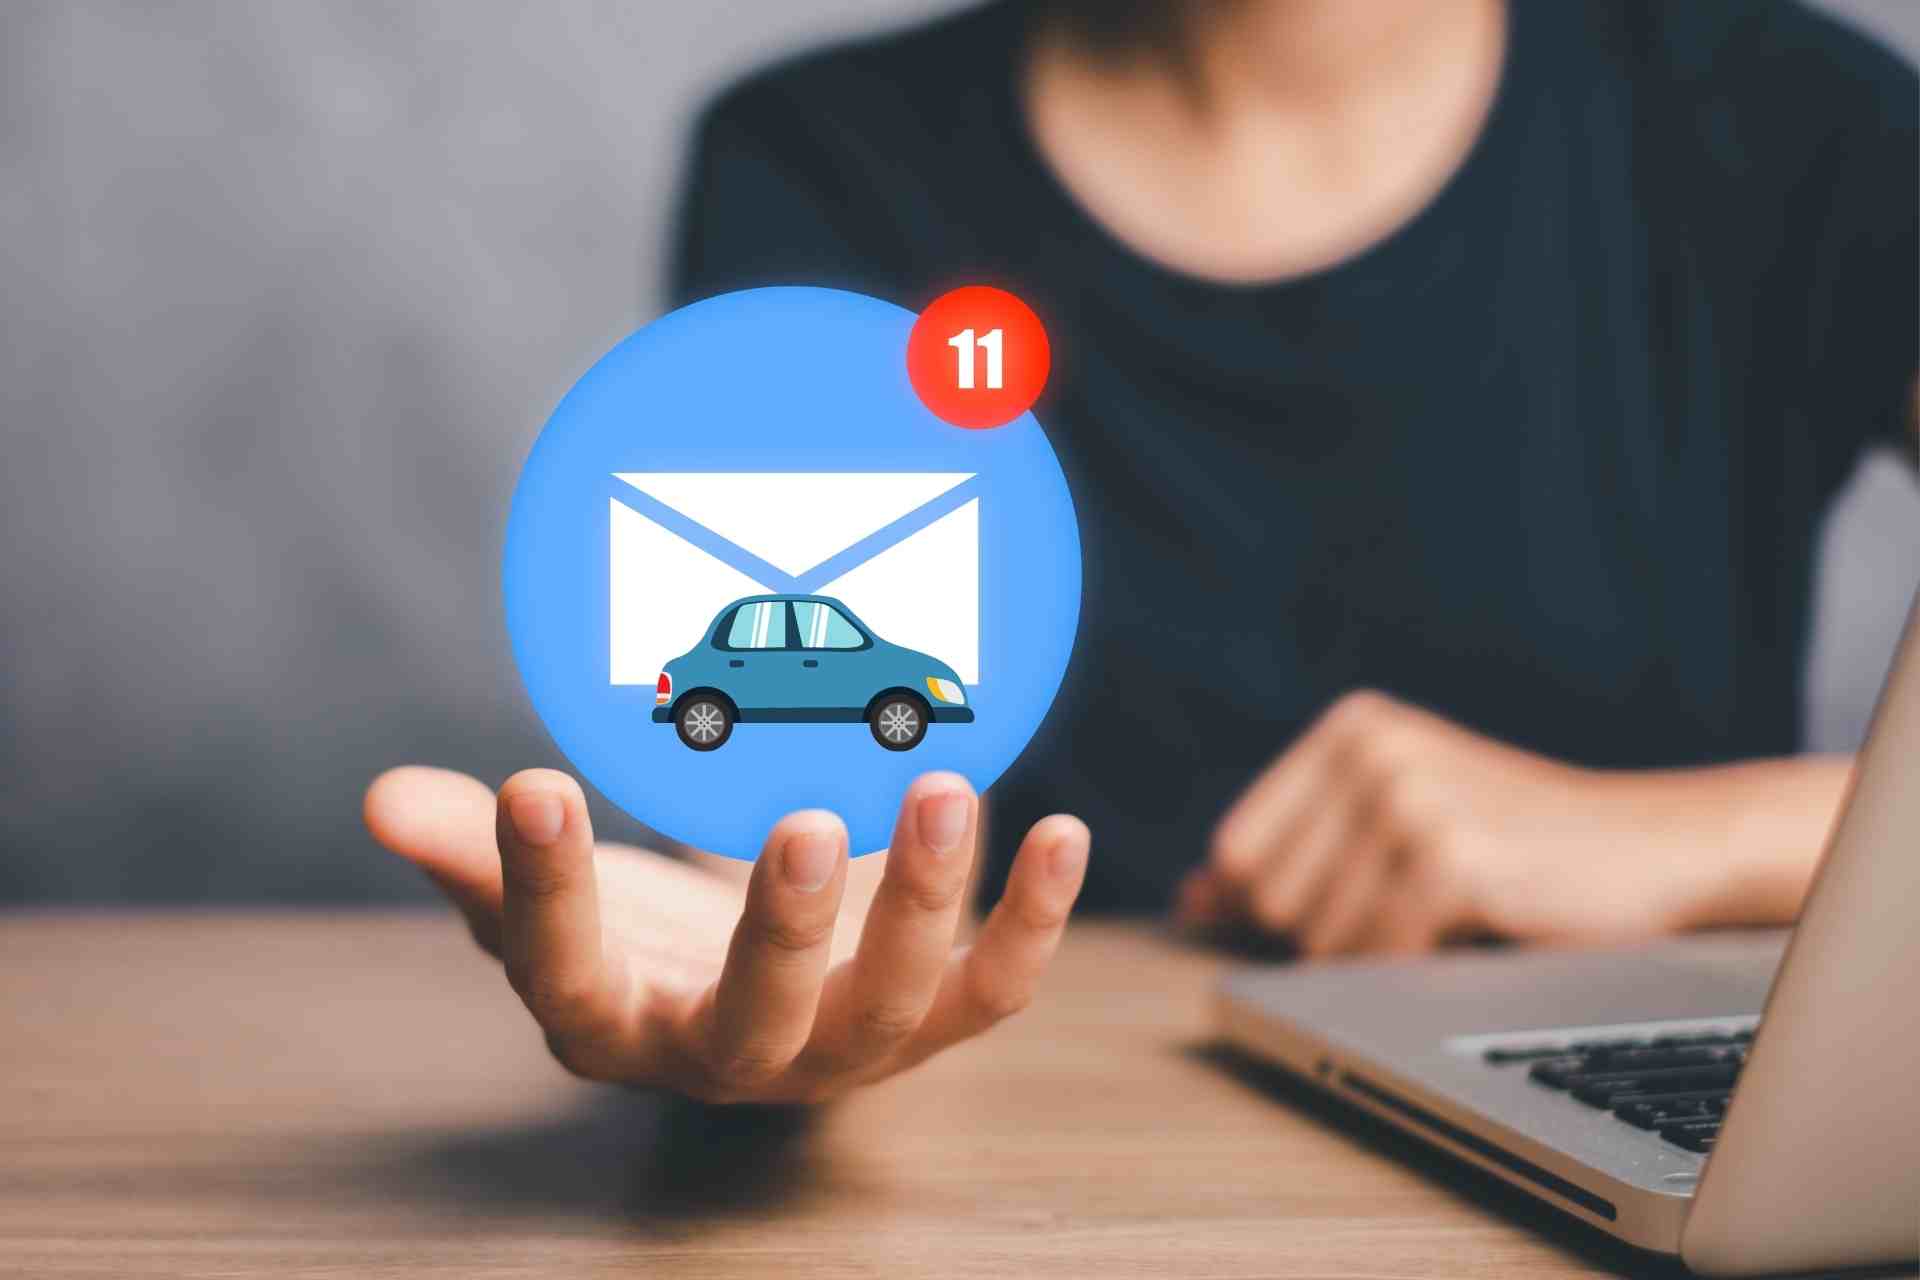 Automotive-Email-Marketing_-Key-metrics-and-tools-to-measure-success